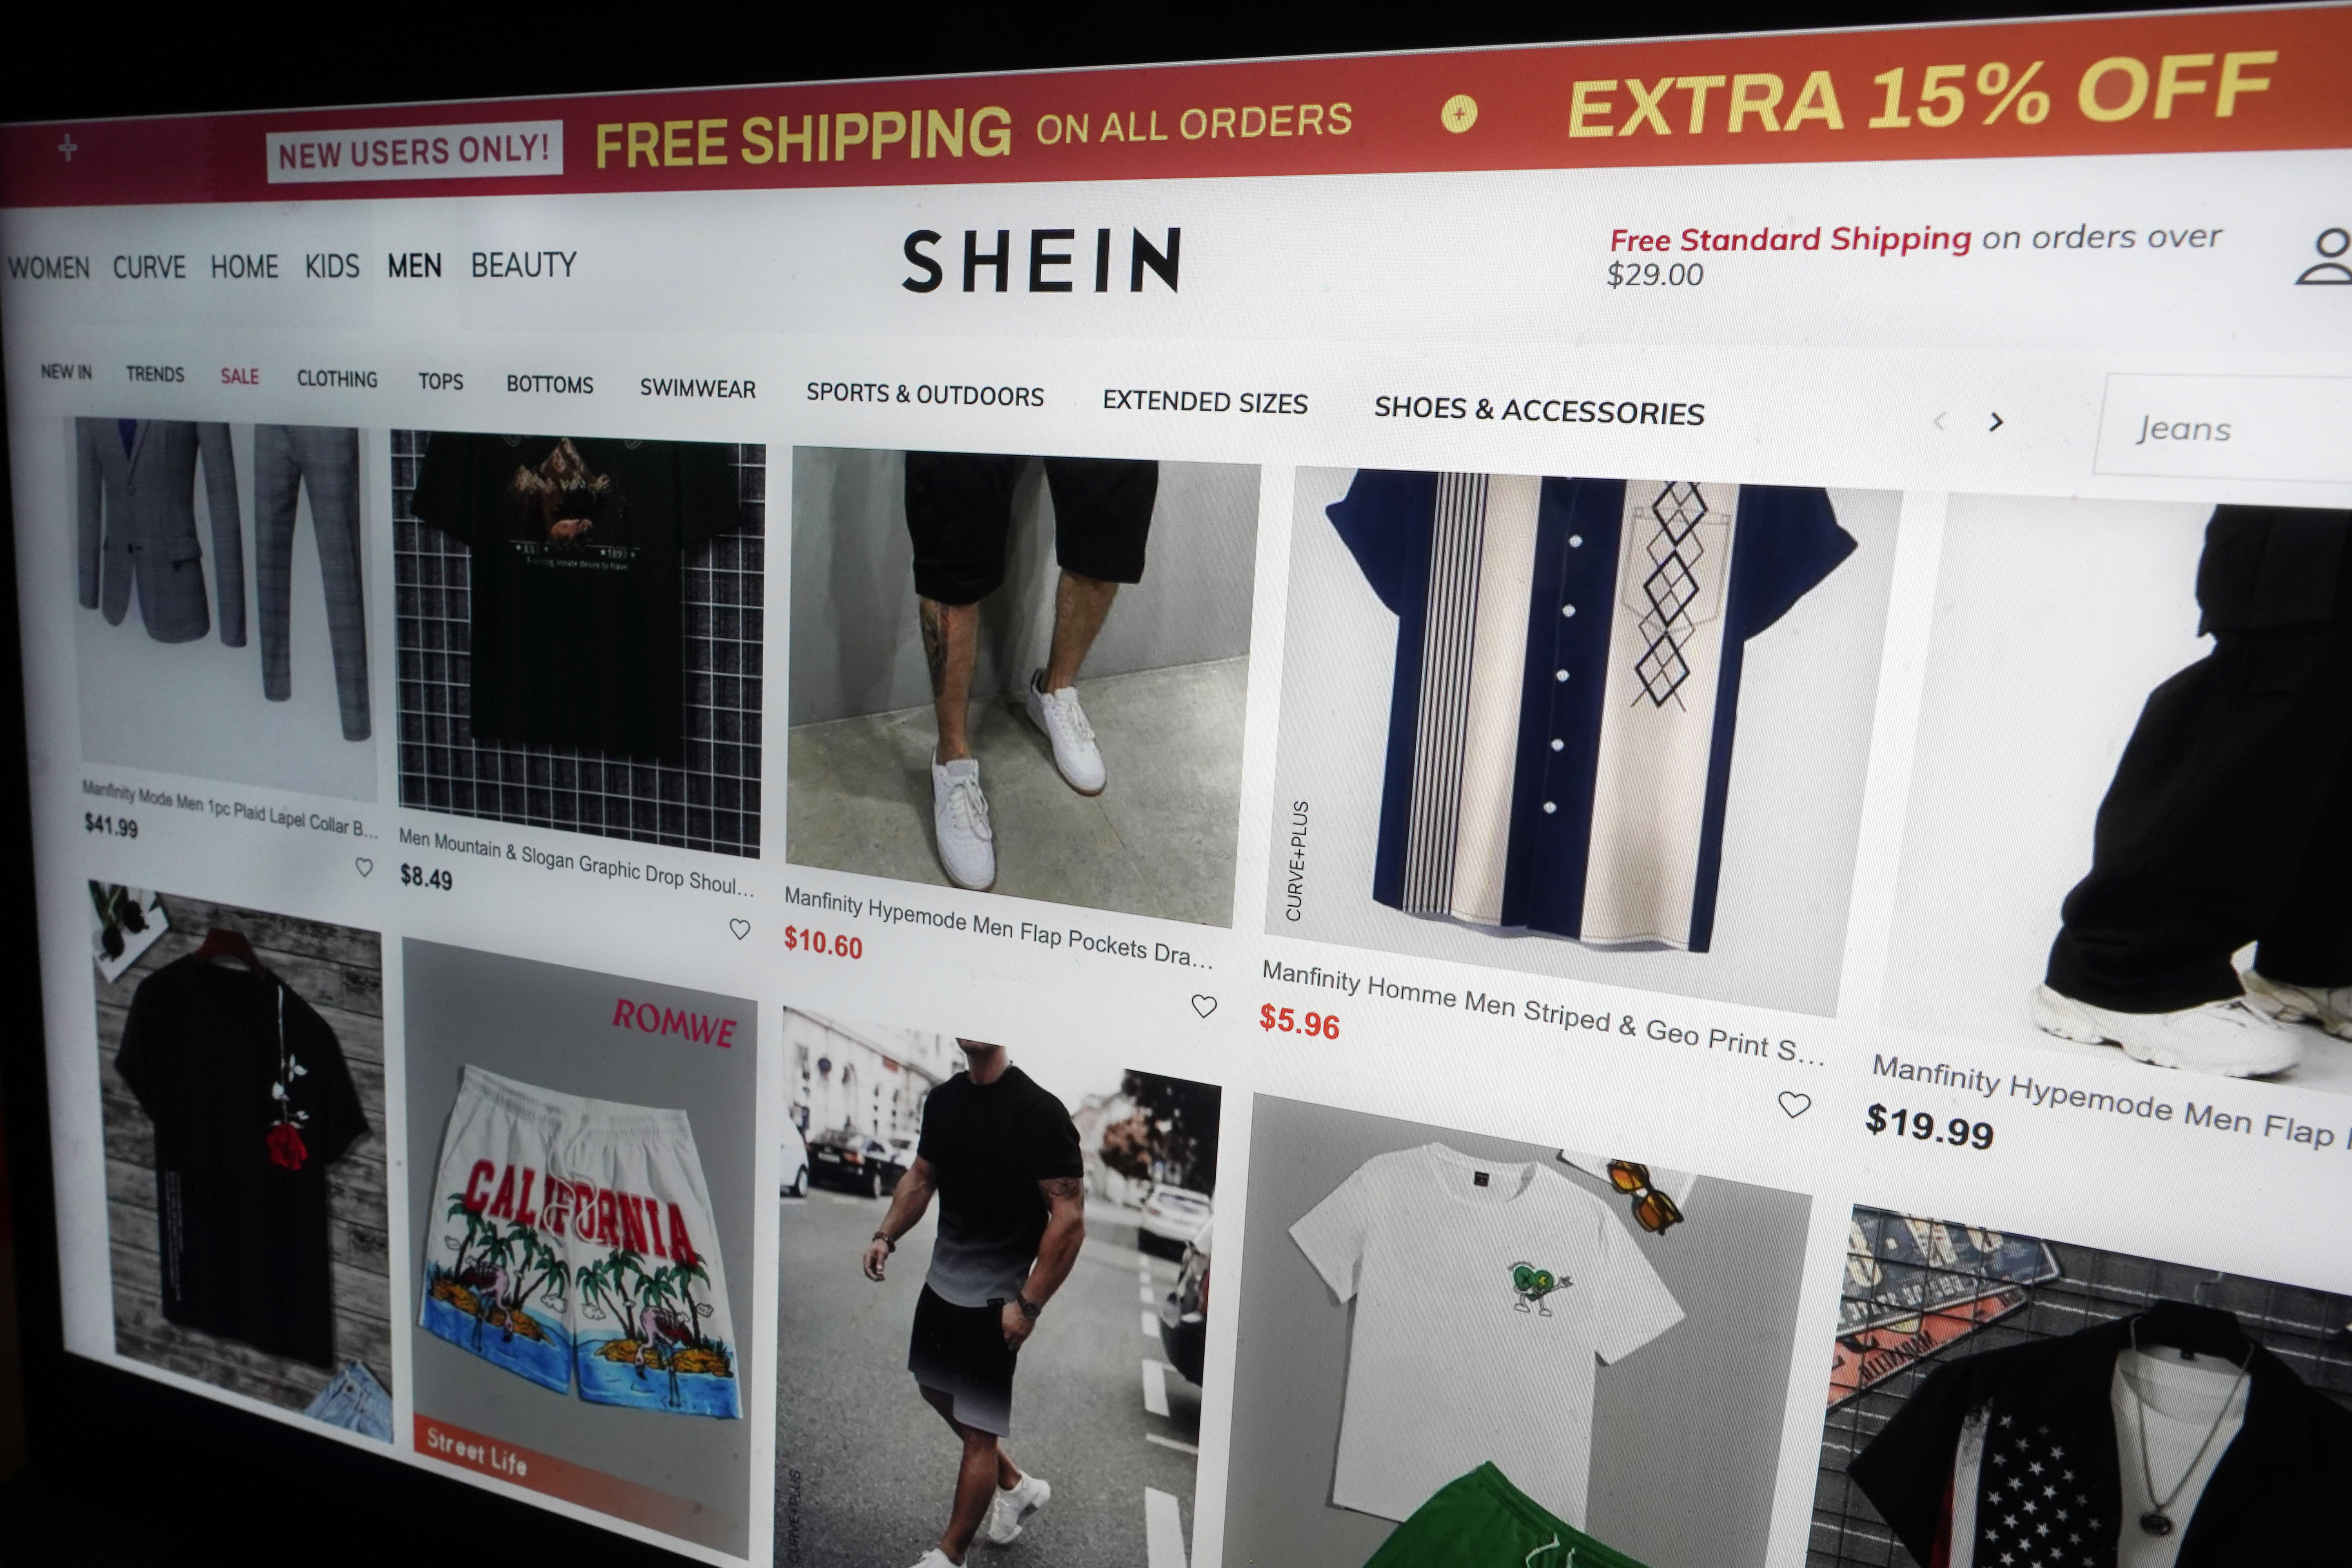 Chinese-Founded Fashion Giant Shein Applies To Launch In US: Report